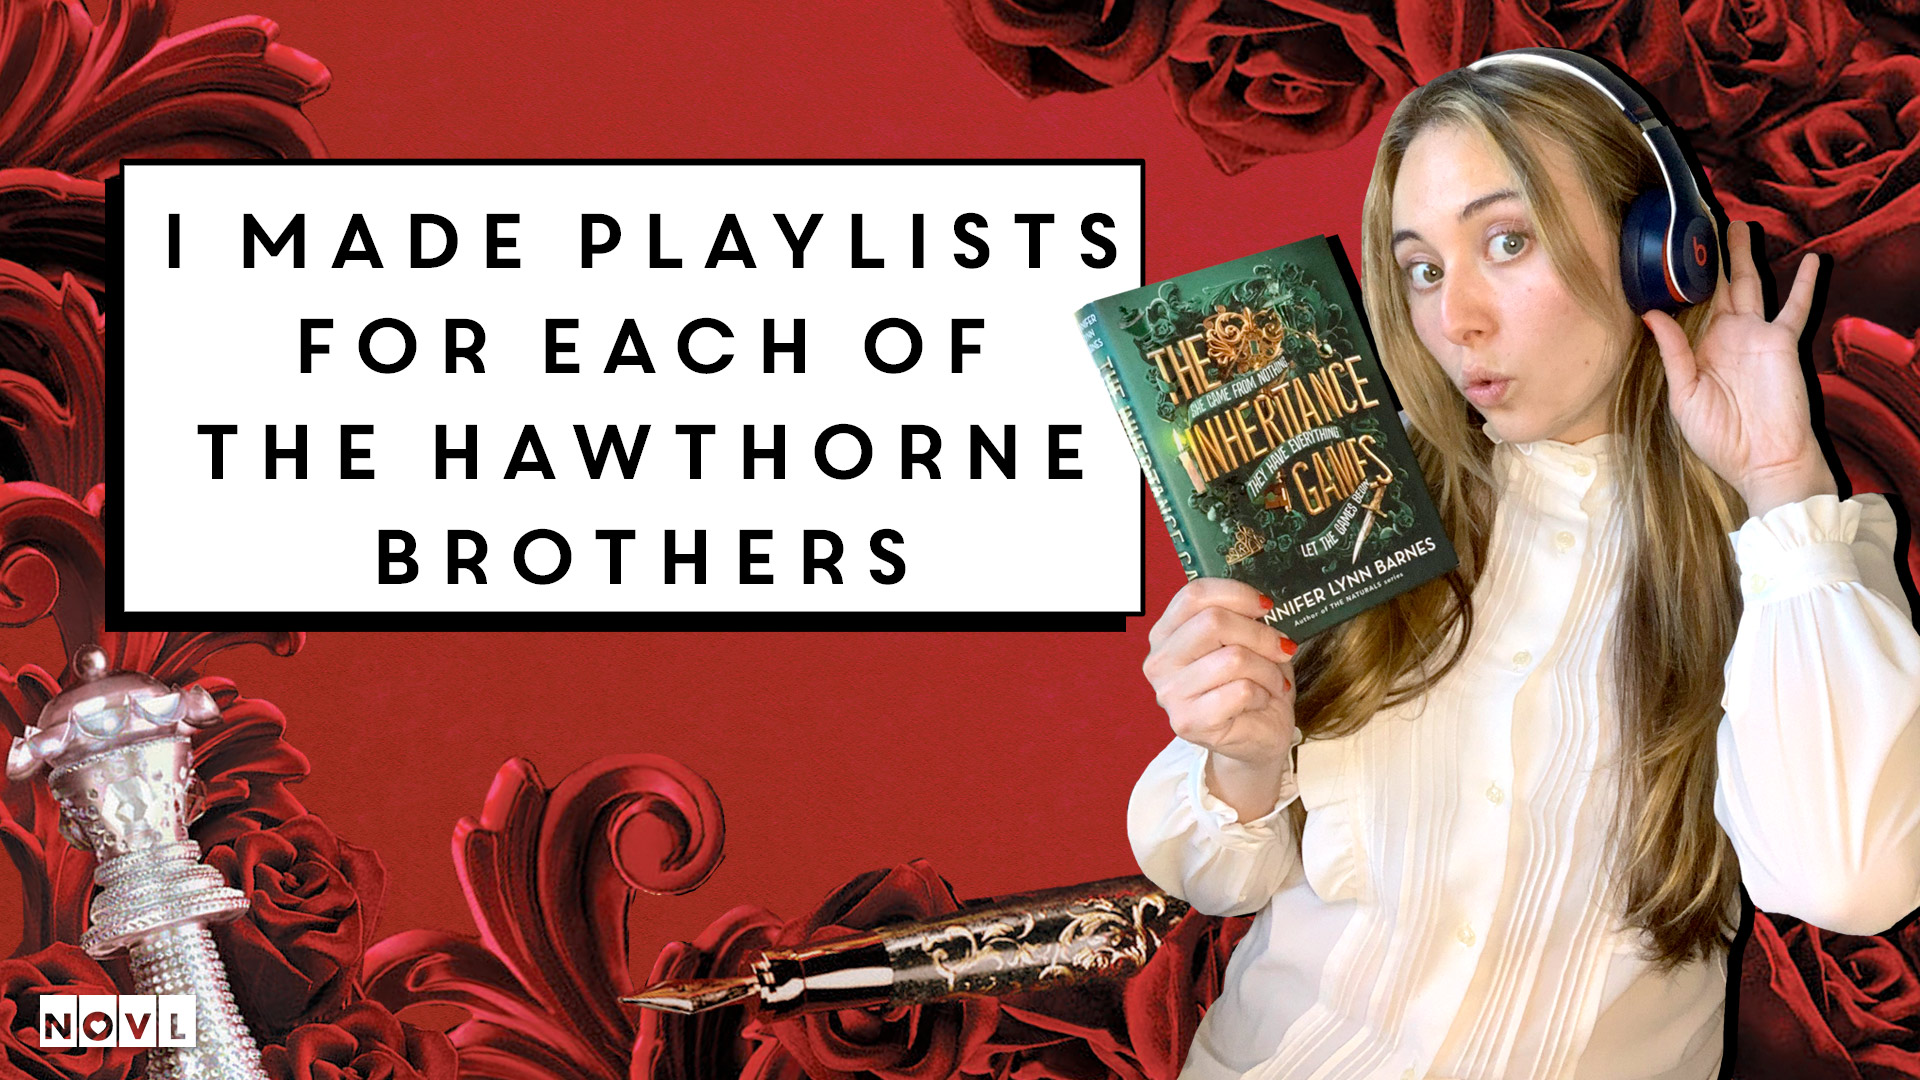 The NOVL Blog, Featured Image for Article: I Made Playlists for Each of the Hawthorne Brothers